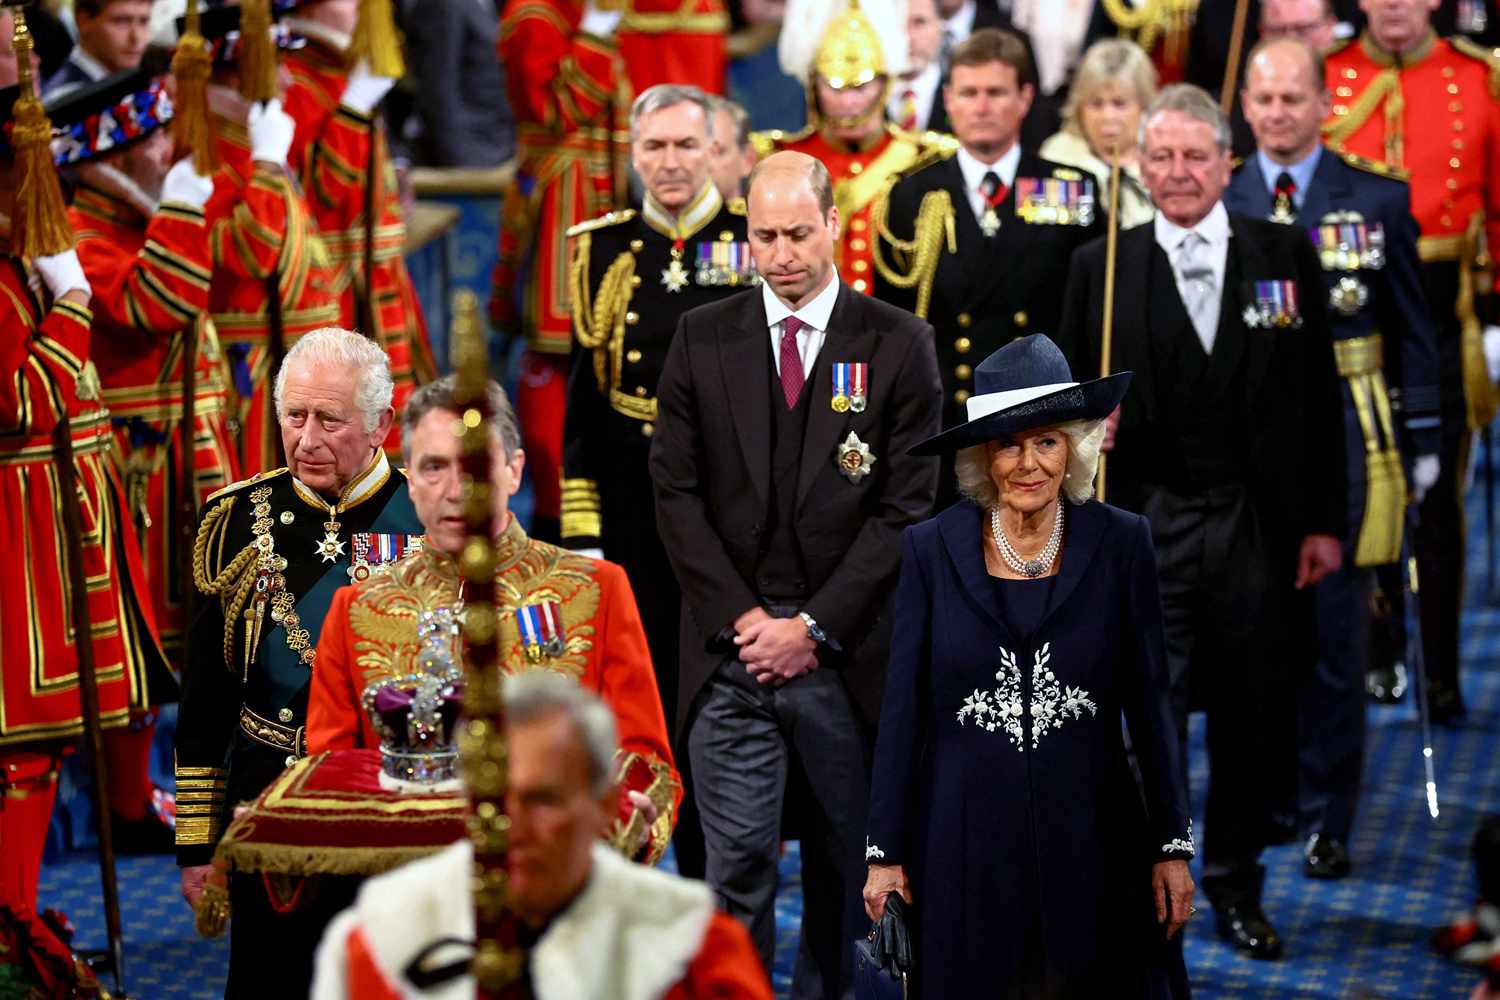 Prince Charles, Prince of Wales (L), the Imperial State Crown (C), Britain's Camilla, Duchess of Cornwall (R) and Britain's Prince William, Duke of Cambridge (rear C) proccess through the Royal Gallery during the State Opening of Parliament